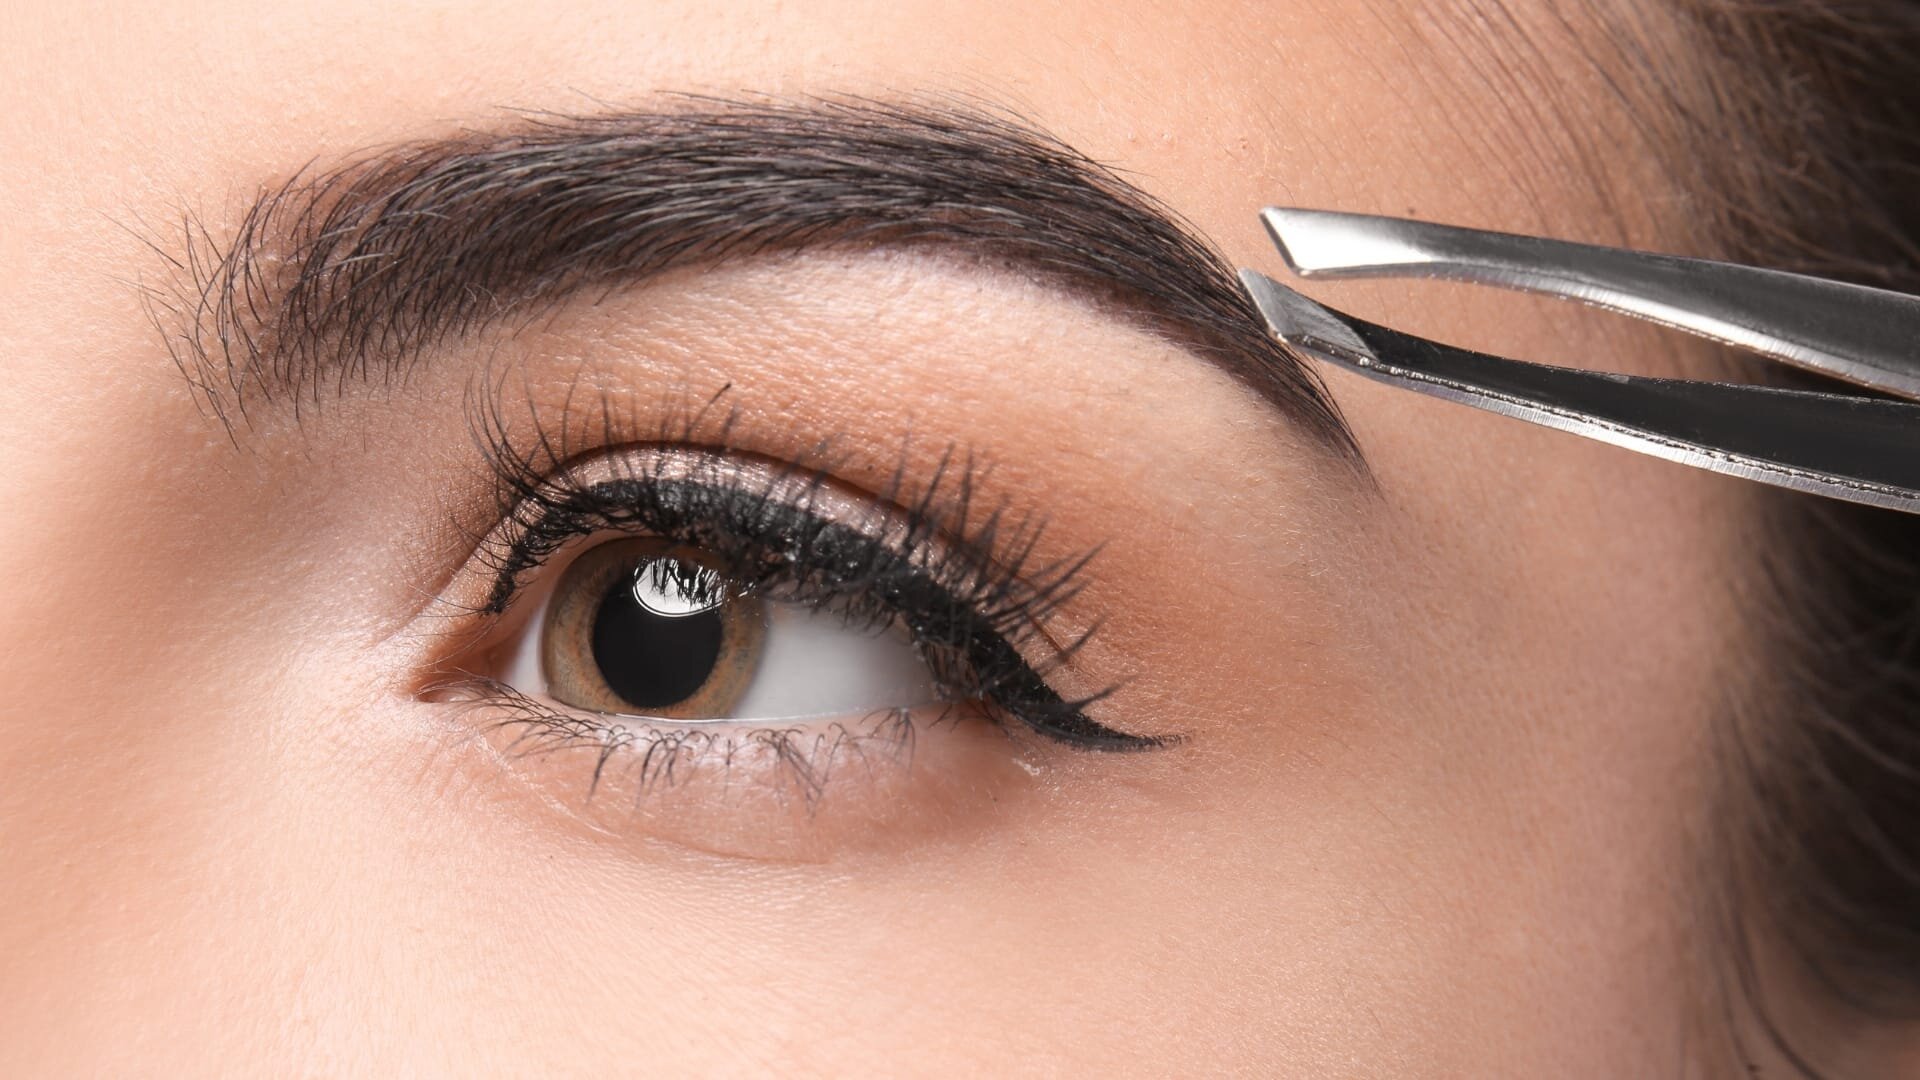 Top 5 Health Benefits Of Brow Restyling